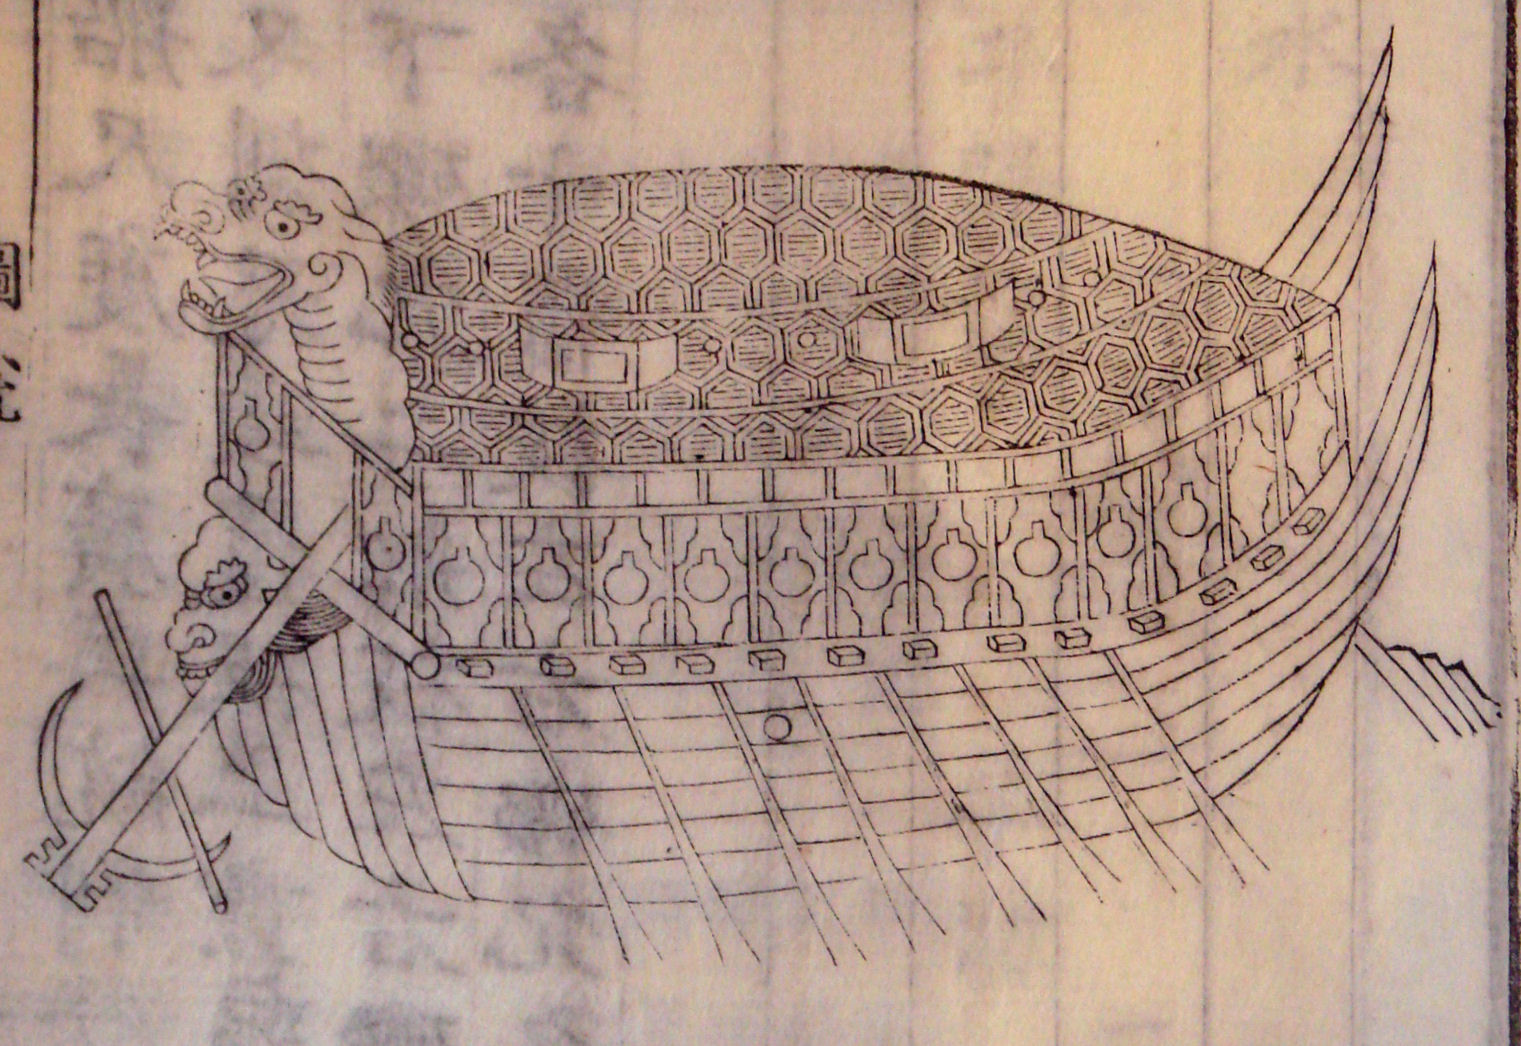 The Legends of Yi Sun-shin and His Turtle Ships